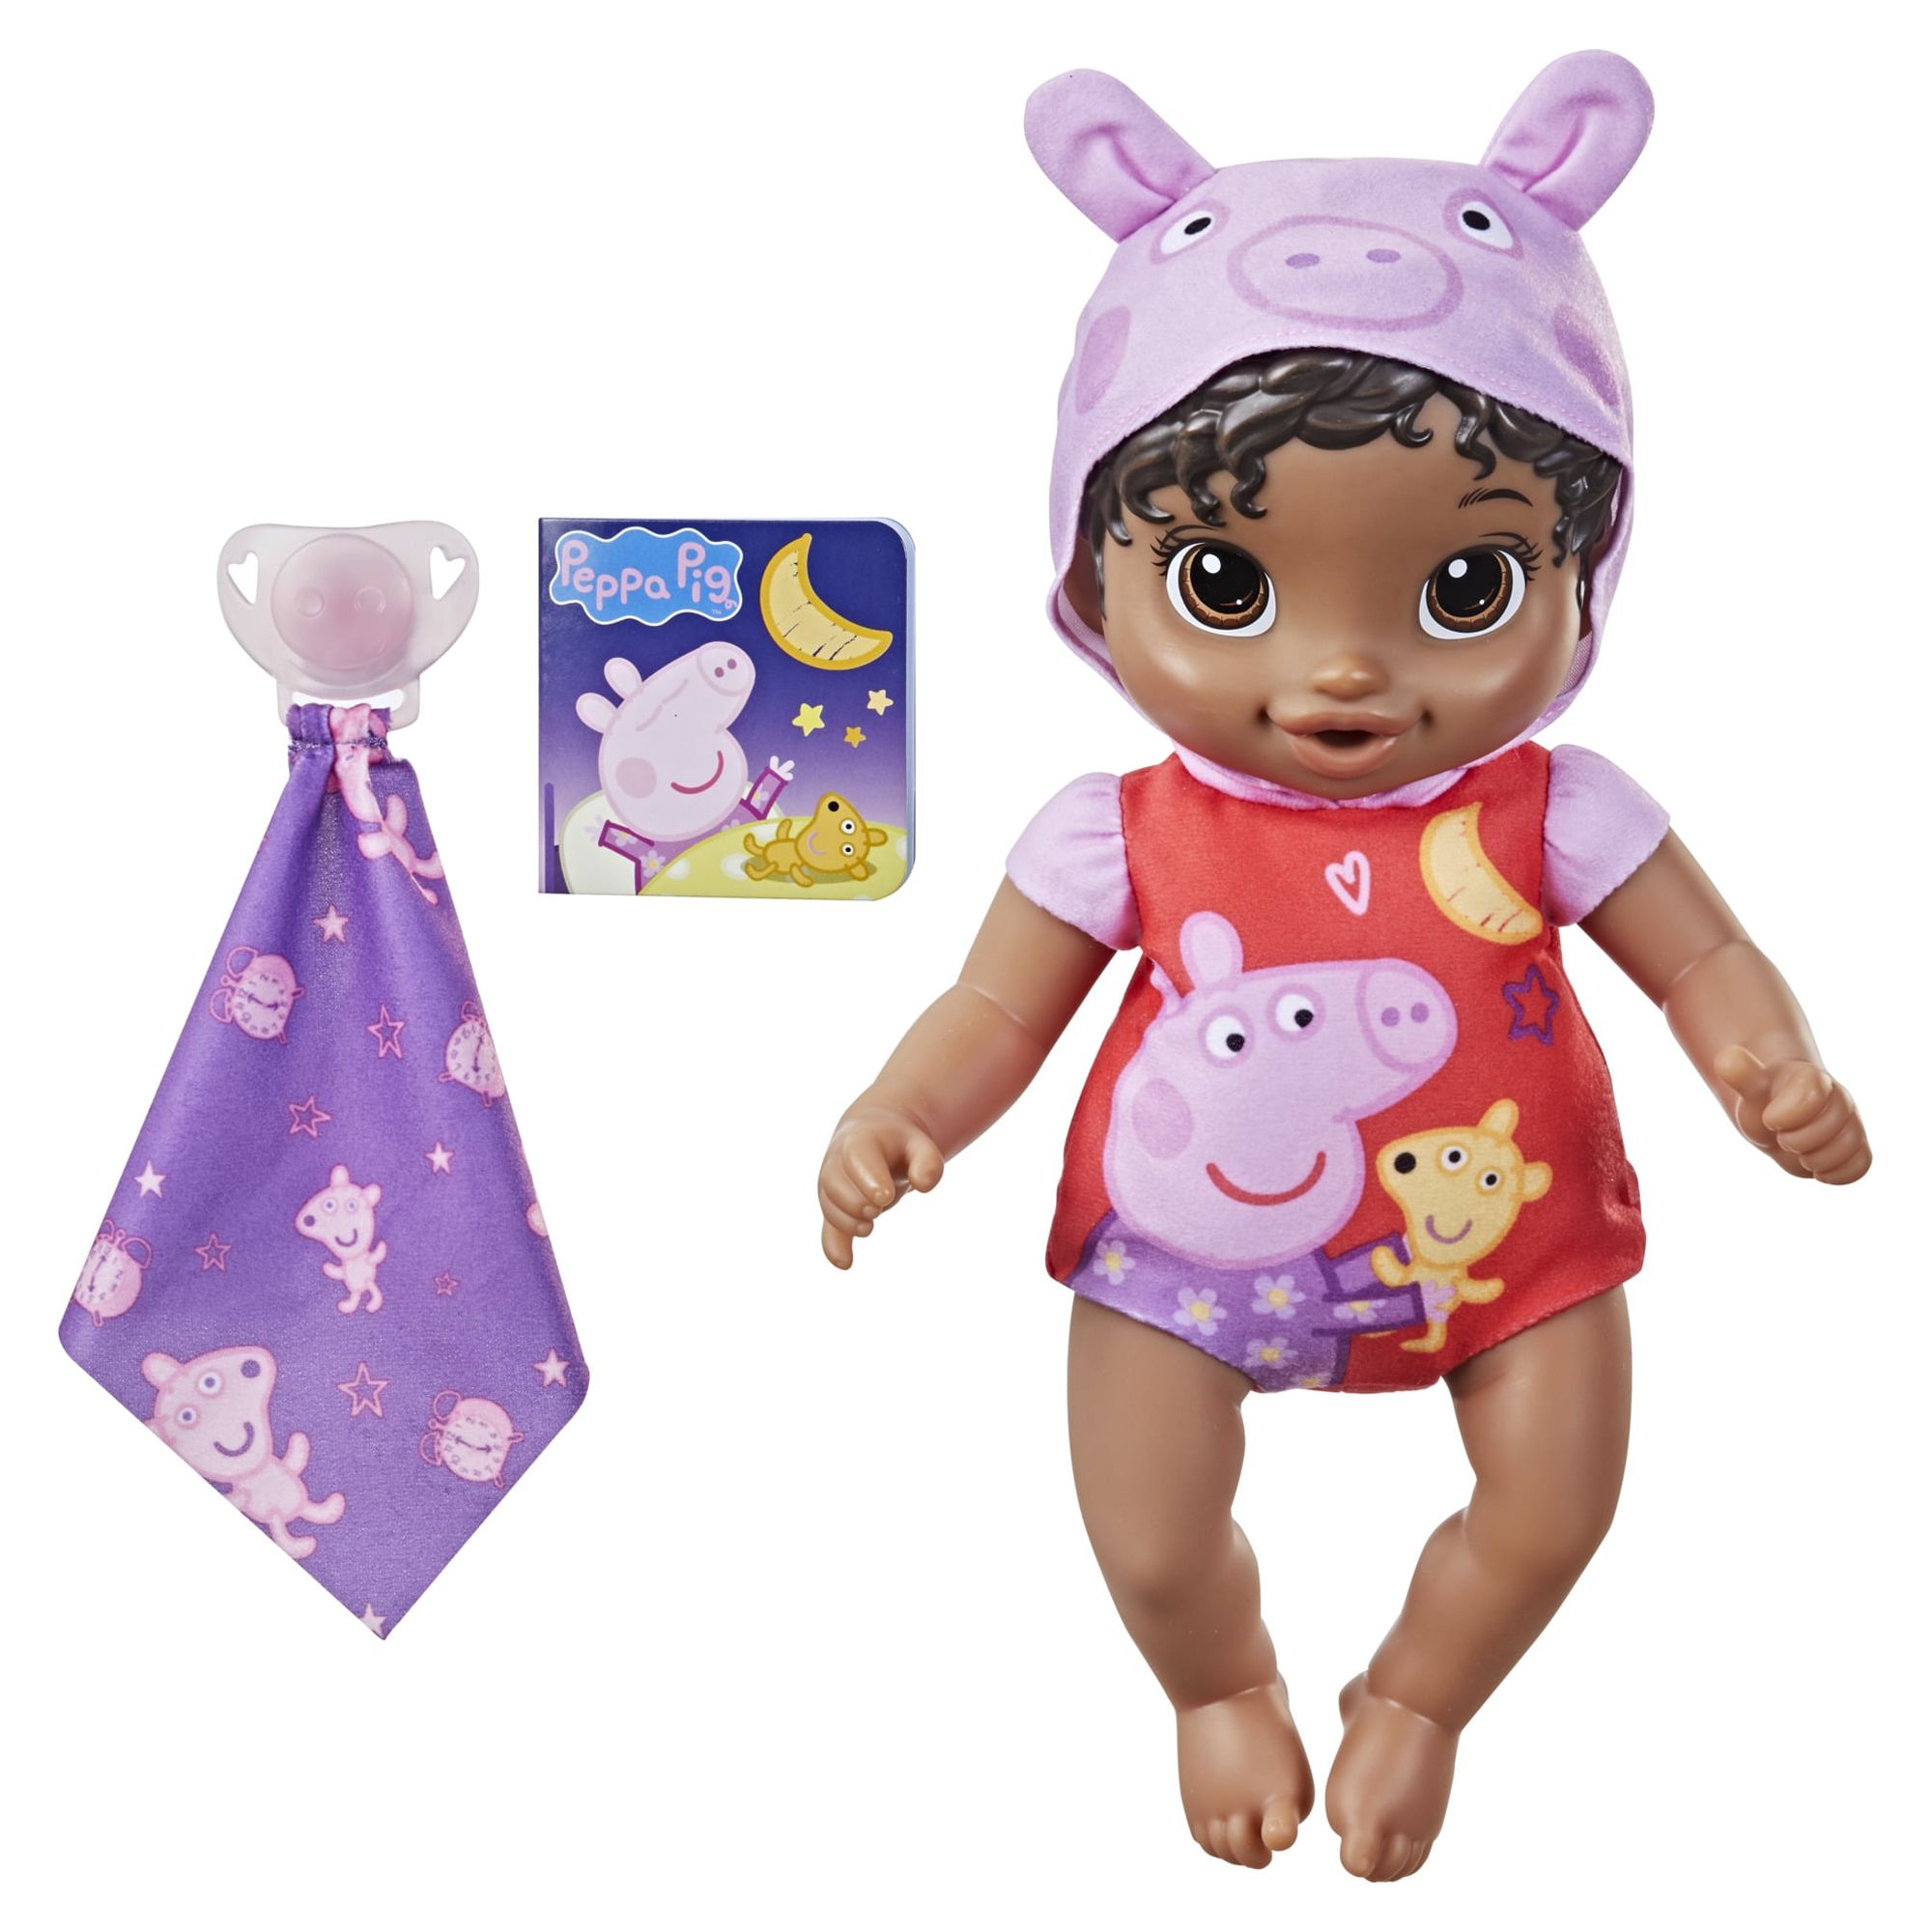 Baby Alive Goodnight Doll, Peppa Pig Toy, Soft, Kids 2 and Up, Black Hair, Only At Walmart - image 1 of 10